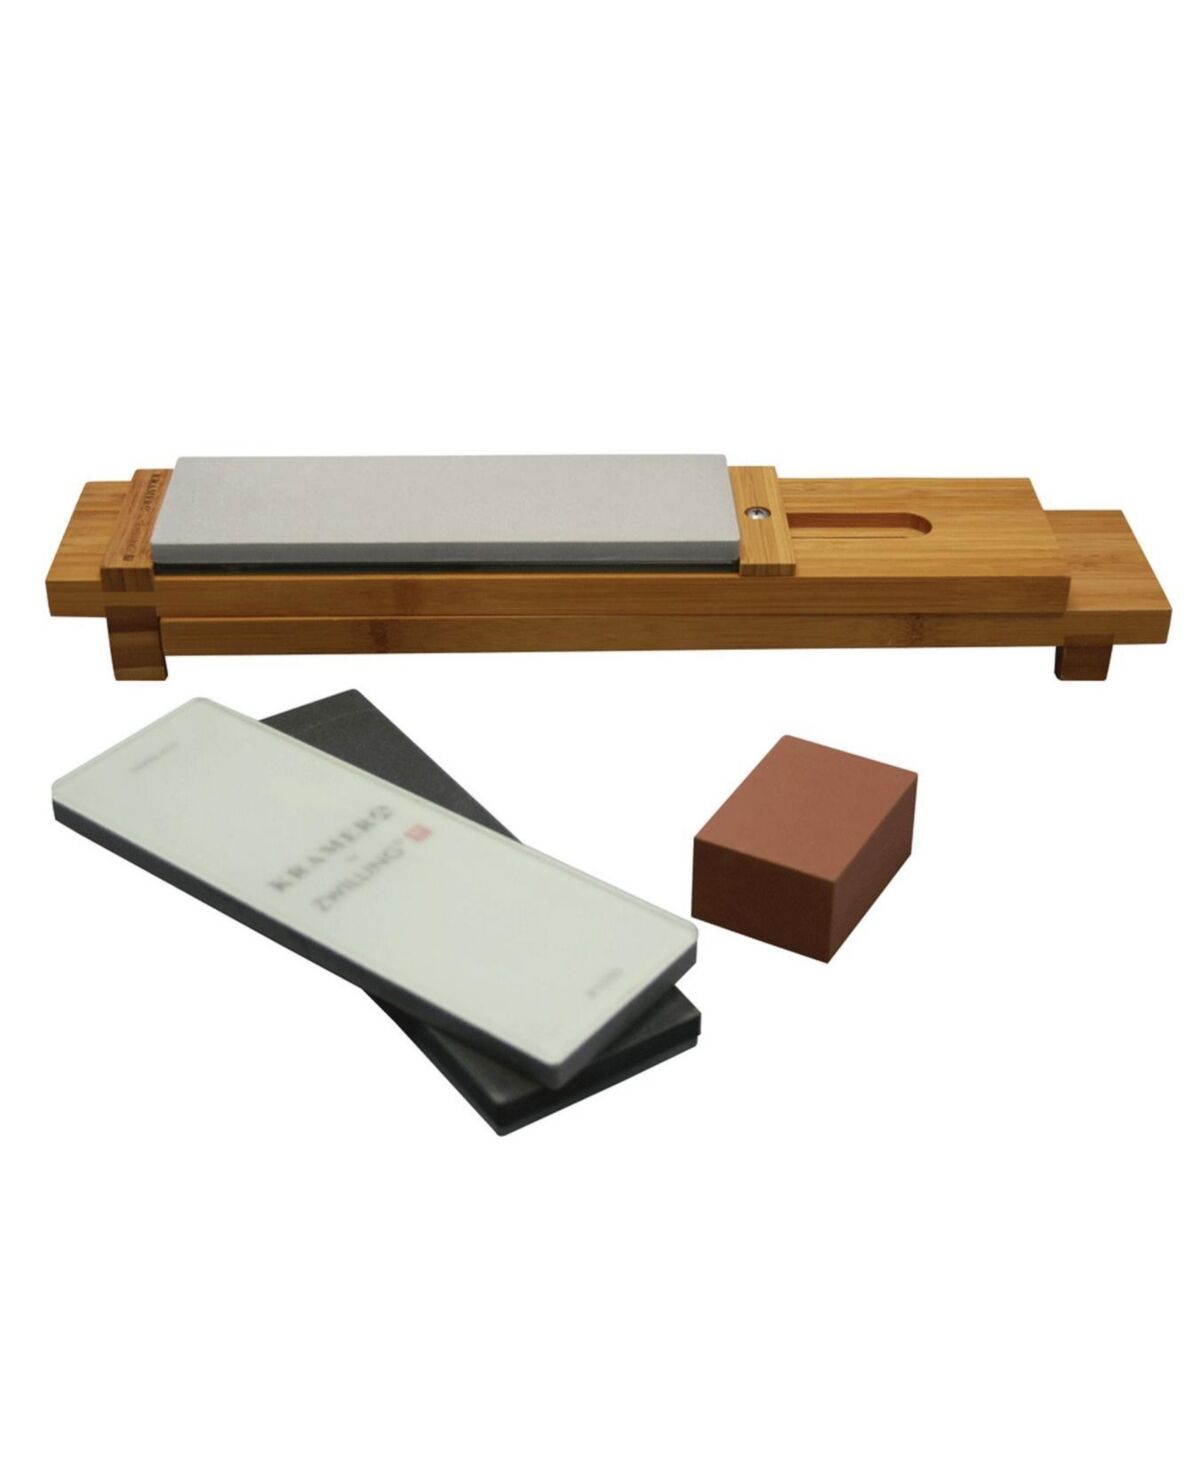 Zwilling Kramer by Zwilling J.a. Henckels 6-Px. Glass Water Stone Sharpening Set - Multi